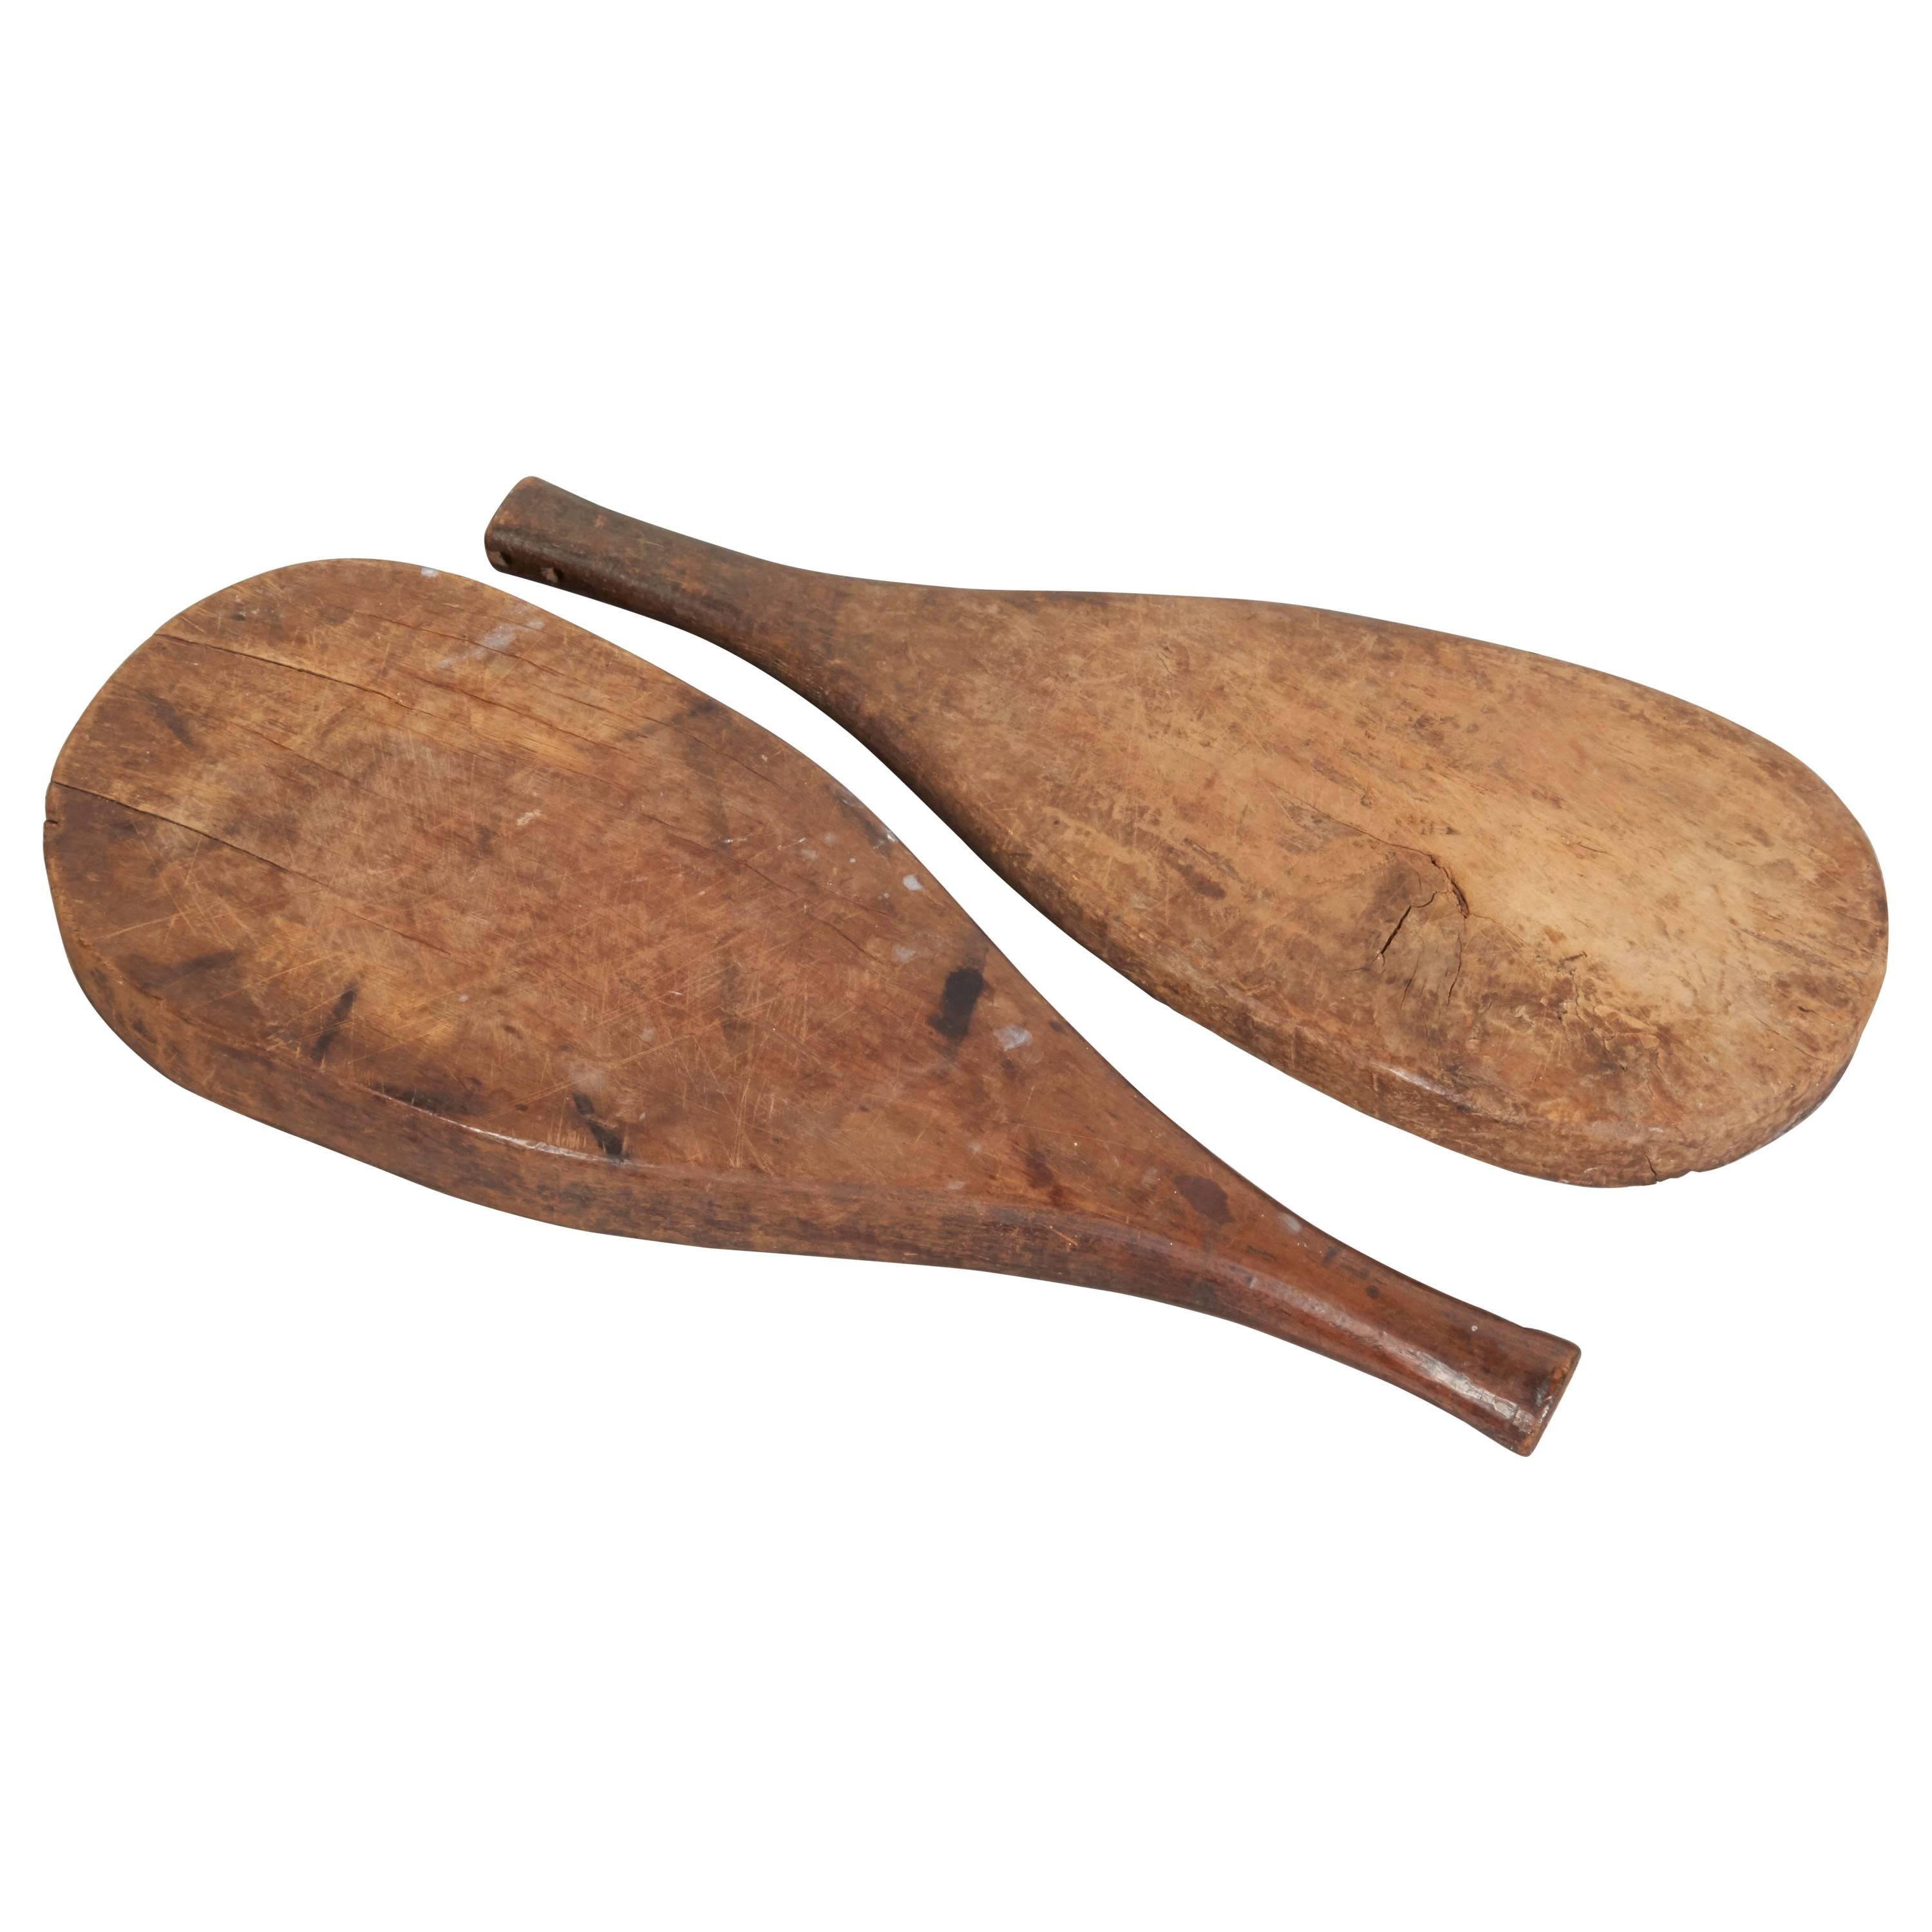 Thick Rustic Paddle Shaped Trays